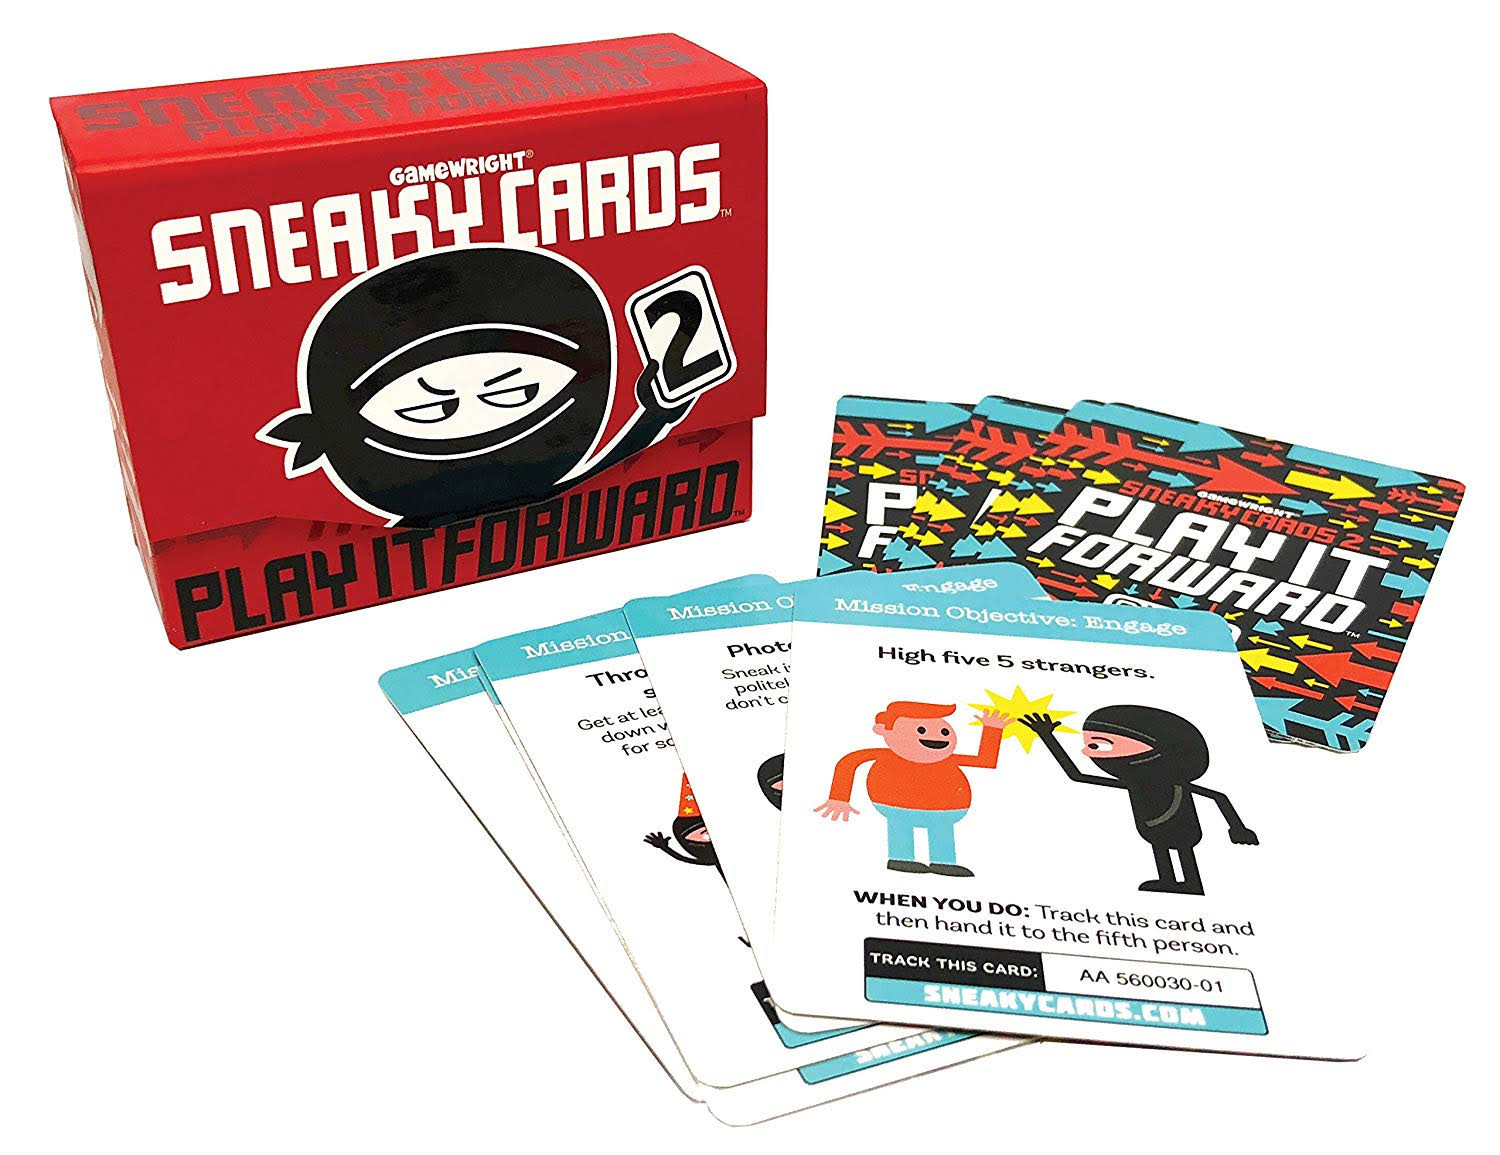 Gamewright Sneaky Cards 2 Game